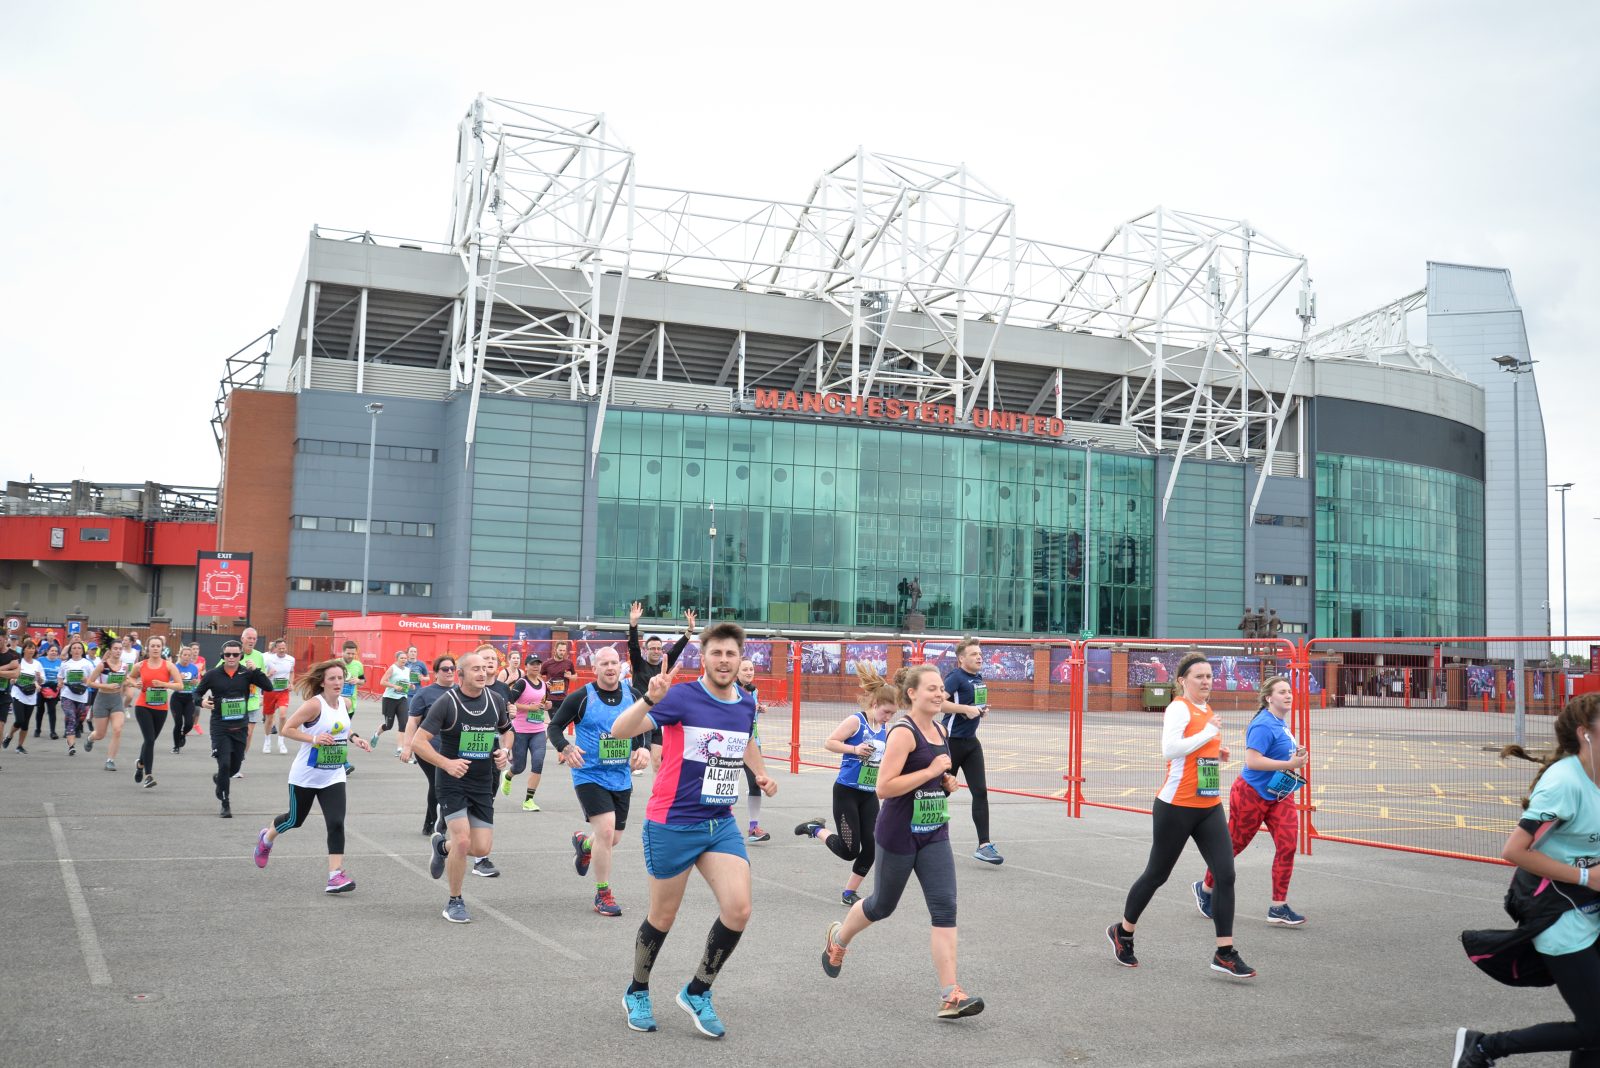 Sir Mo Farah will join Mancs in the Great Manchester Run again this year, The Manc